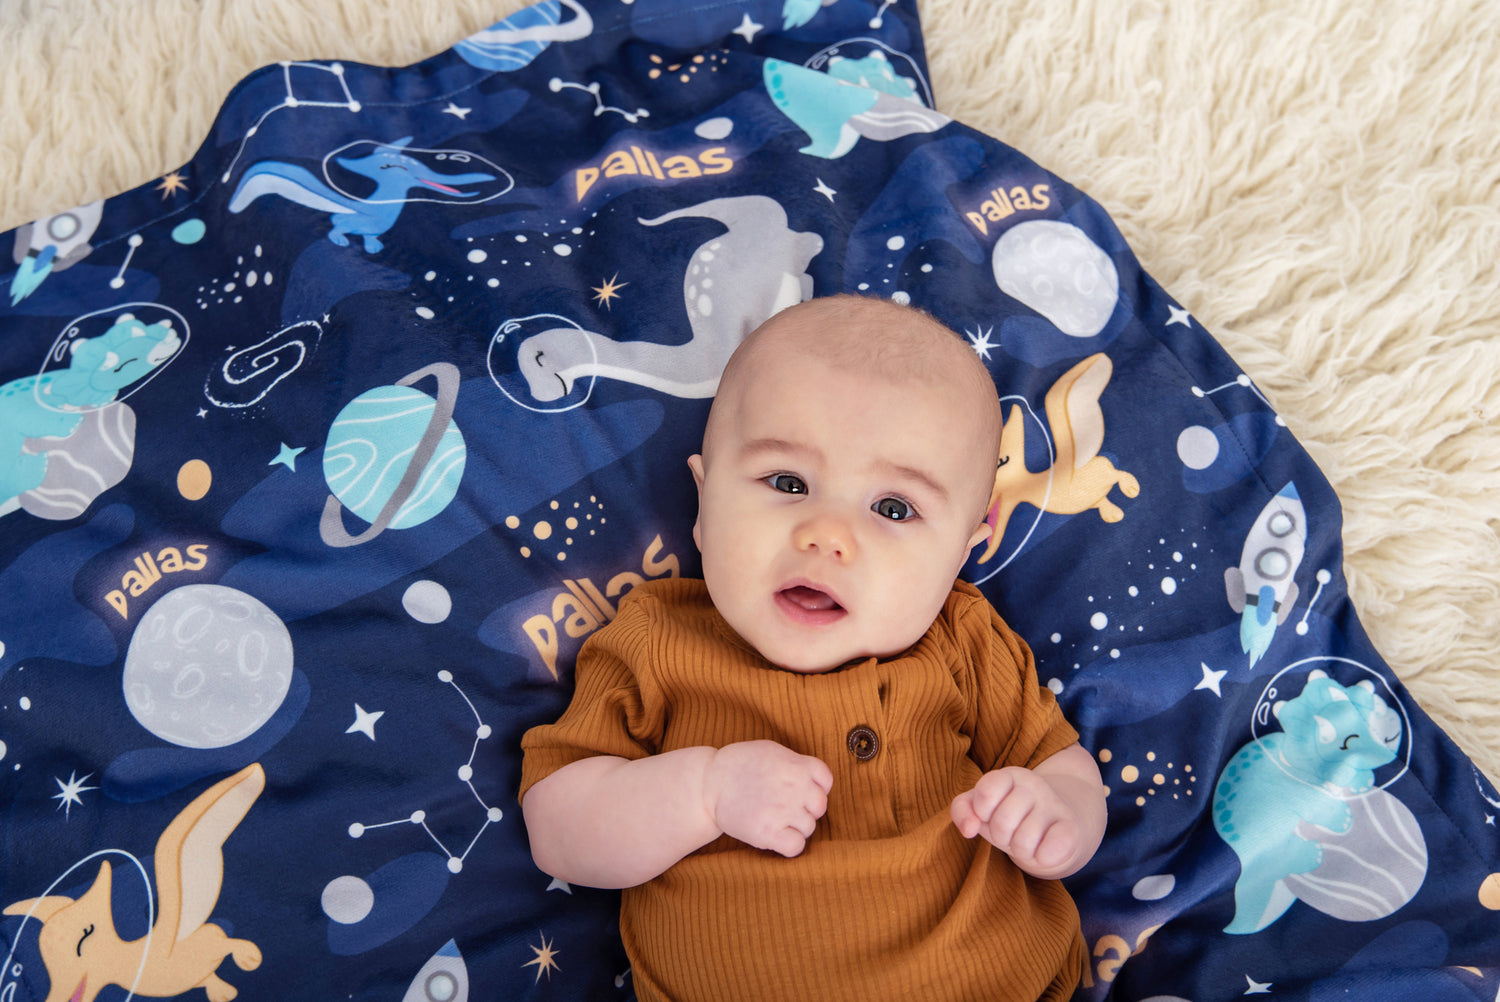 Unwrapping Warmth: Handmade Personalized Blankets - The Perfect Gift for Newborns